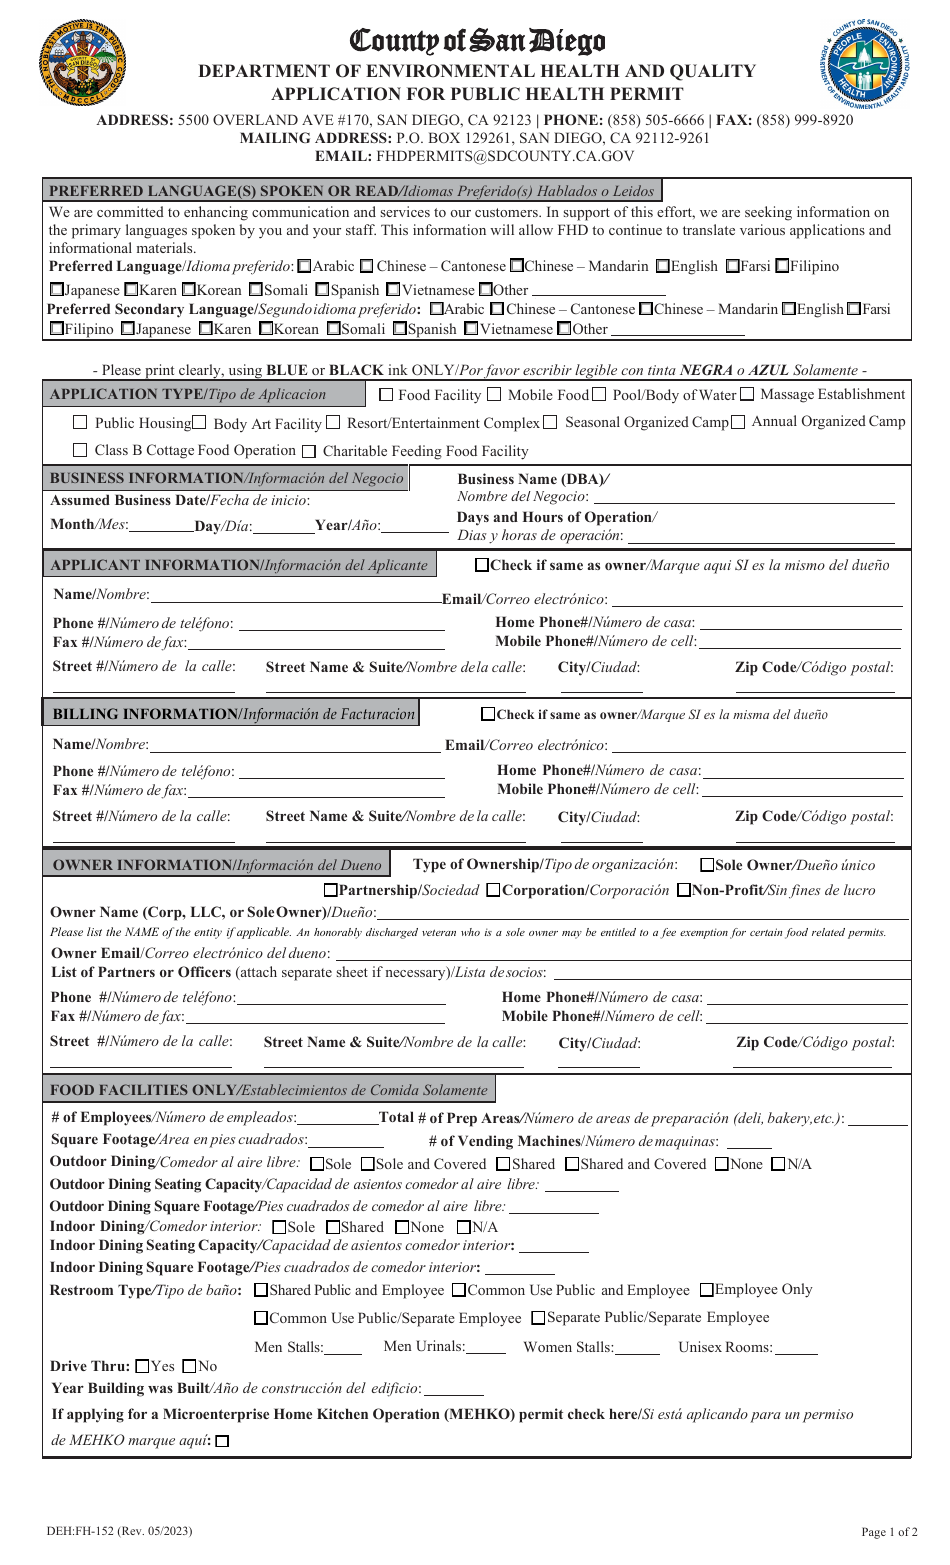 Form DEH:FH-152 Application for Public Health Permit - County of San Diego, California, Page 1